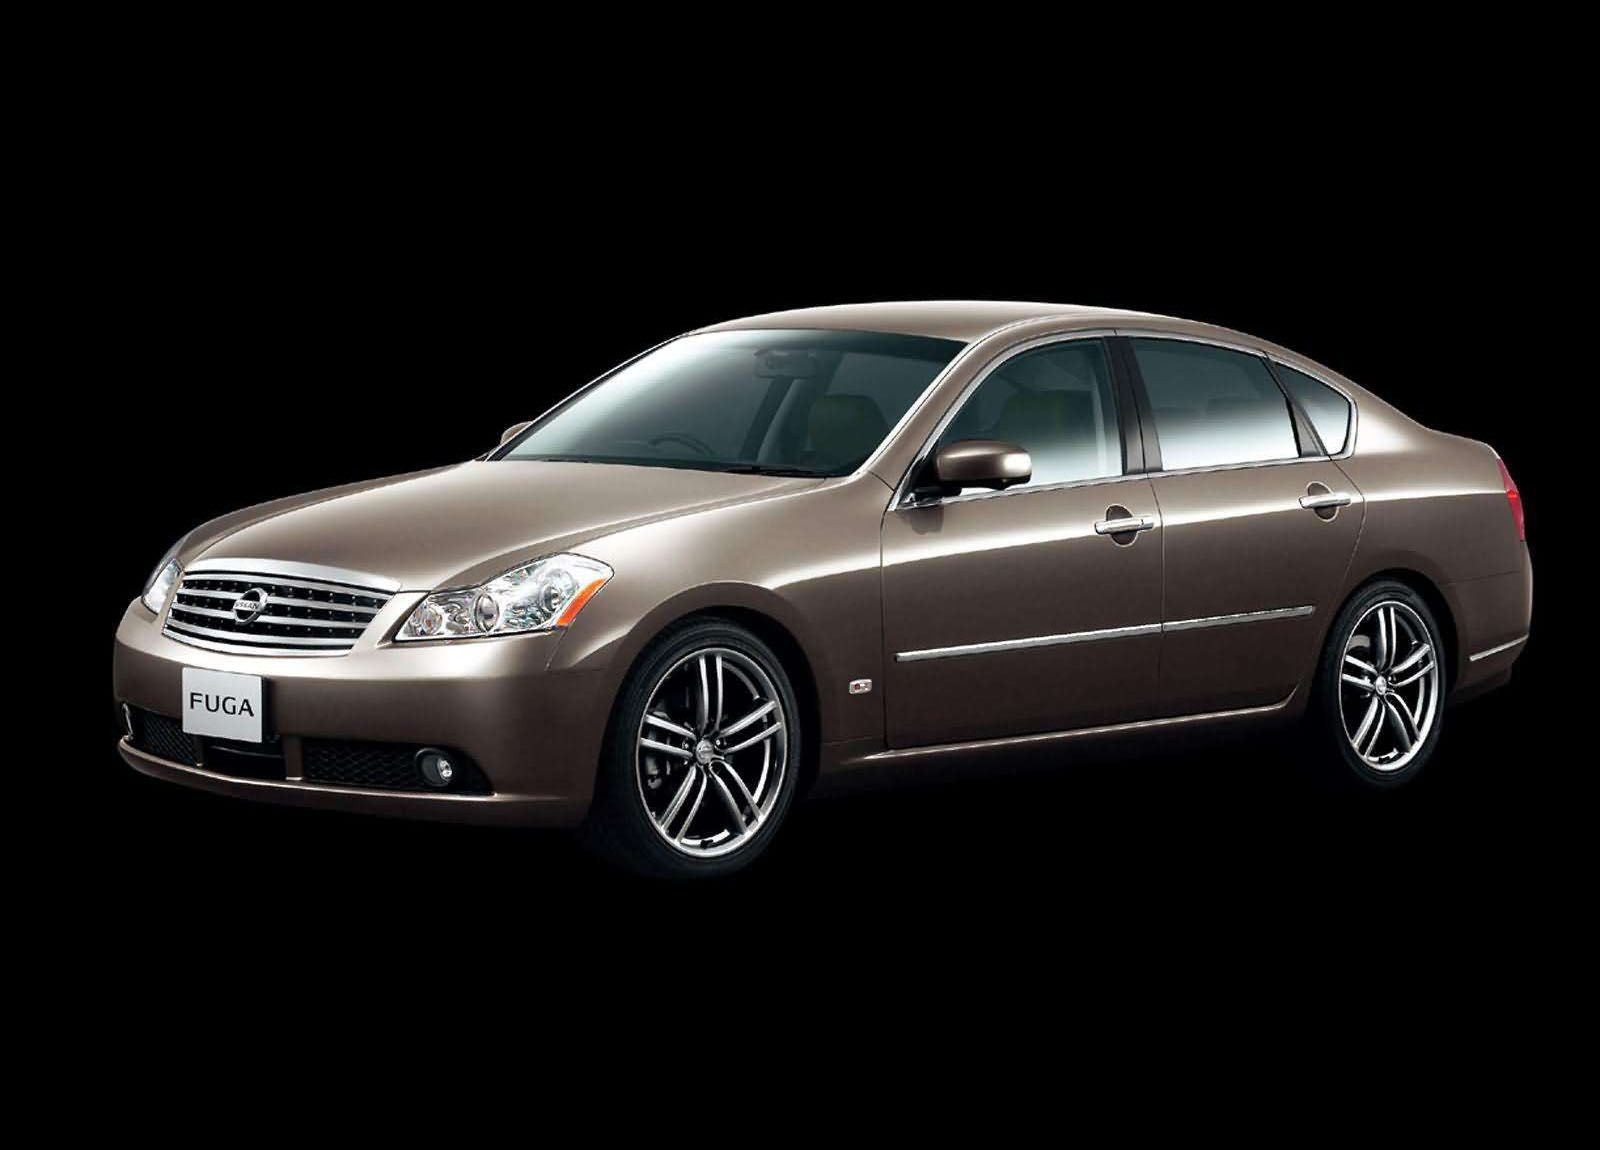 nissan fuga 350gt owners manual